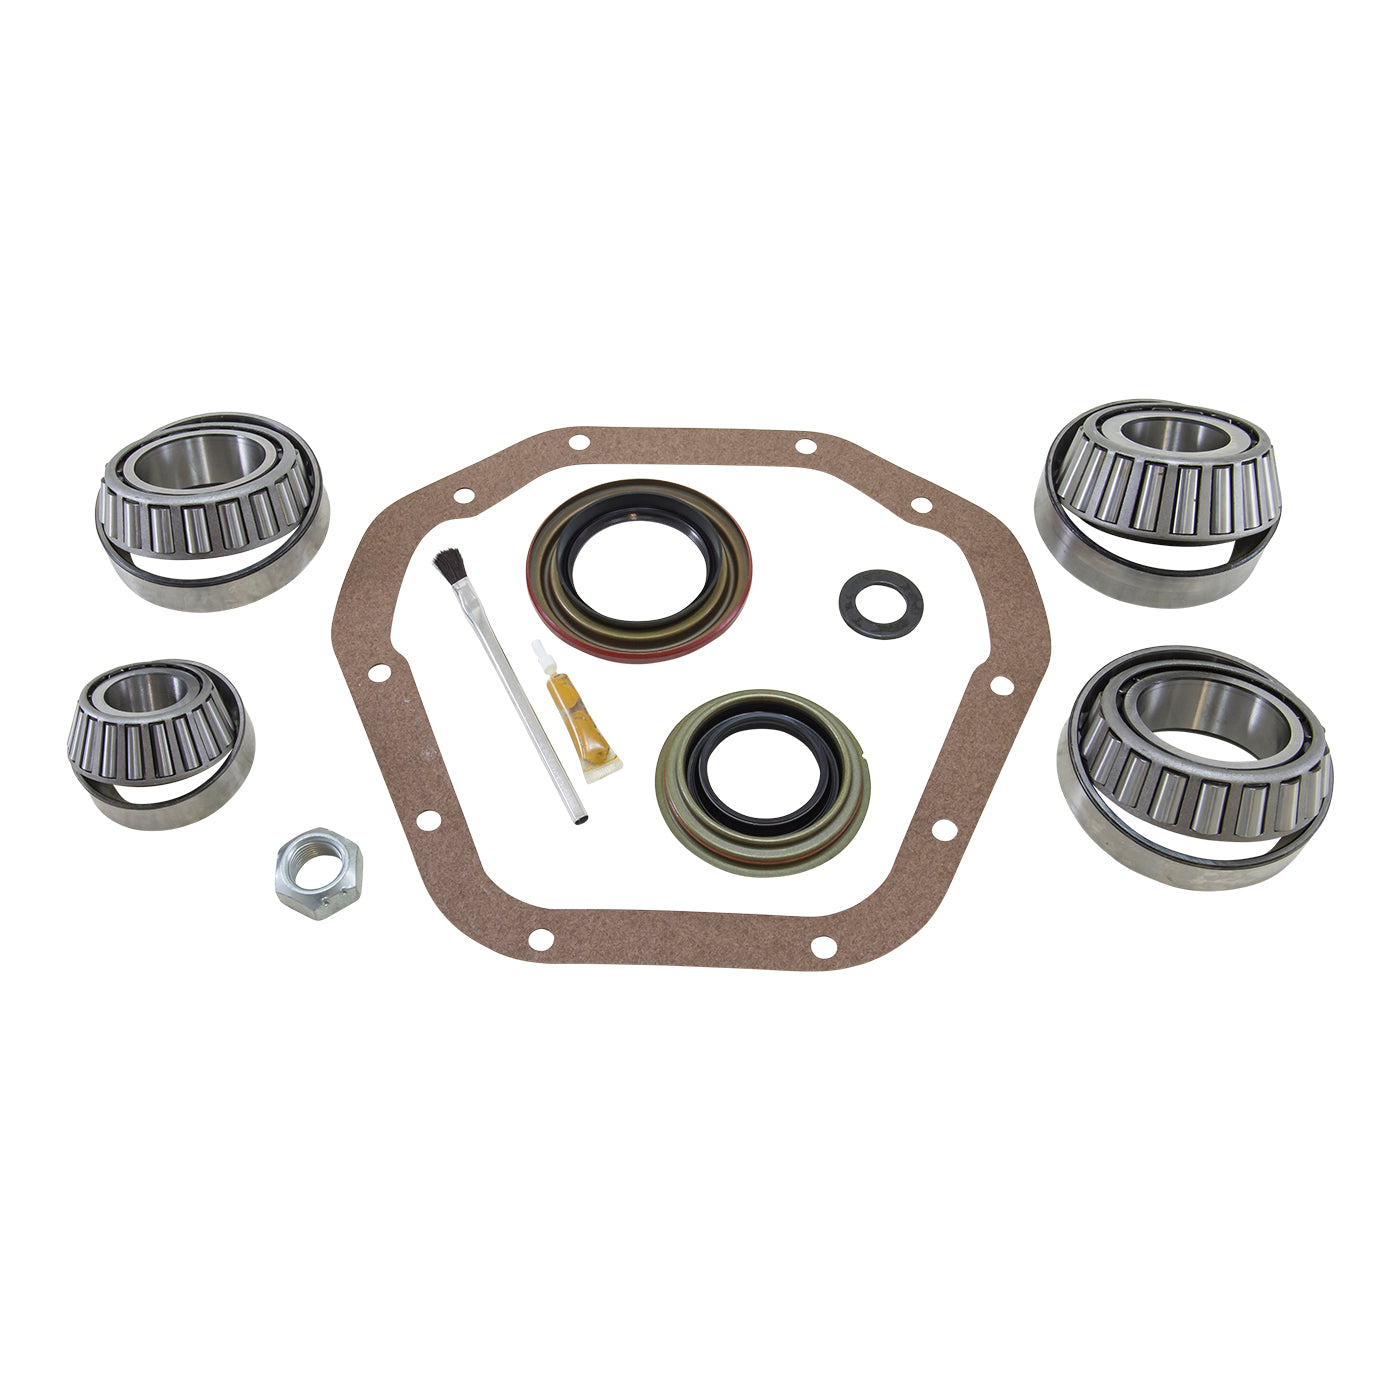 Yukon Gear Bearing install kit for '11 & up Ford 10.5" differential BK F10.5-D